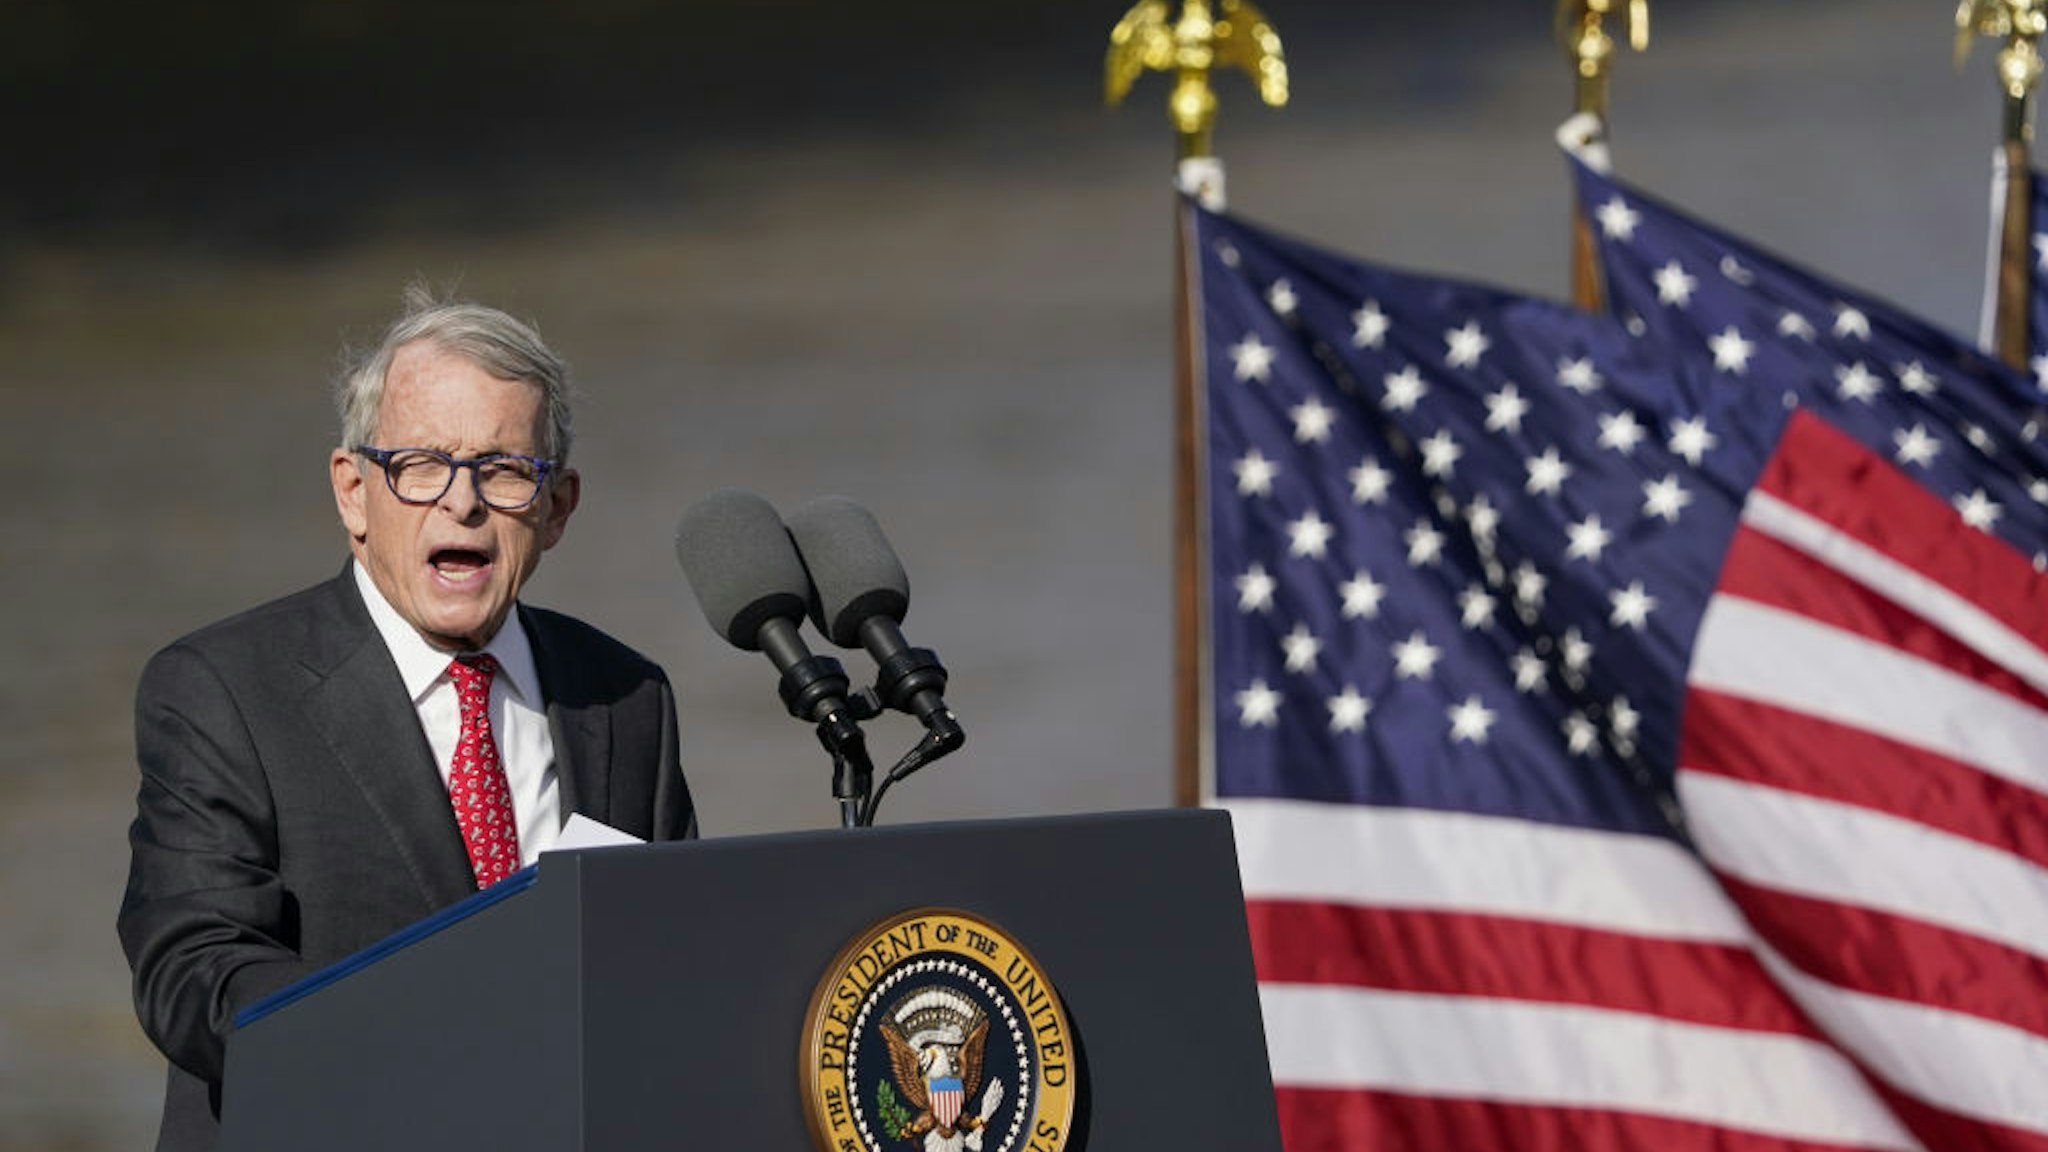 Mike DeWine, governor of Ohio, speaks during an event in Covington, Kentucky, US, on Wednesday, Jan. 4, 2023. President Biden spoke about the 2021 Bipartisan Infrastructure Law and the bills $1.6 billion used for repairs to the 60-year-old Brent Spence Bridge, which connects a span of Interstate 75 over the Ohio River into Cincinnati. Photographer: Joshua A. Bickel/Bloomberg via Getty Images